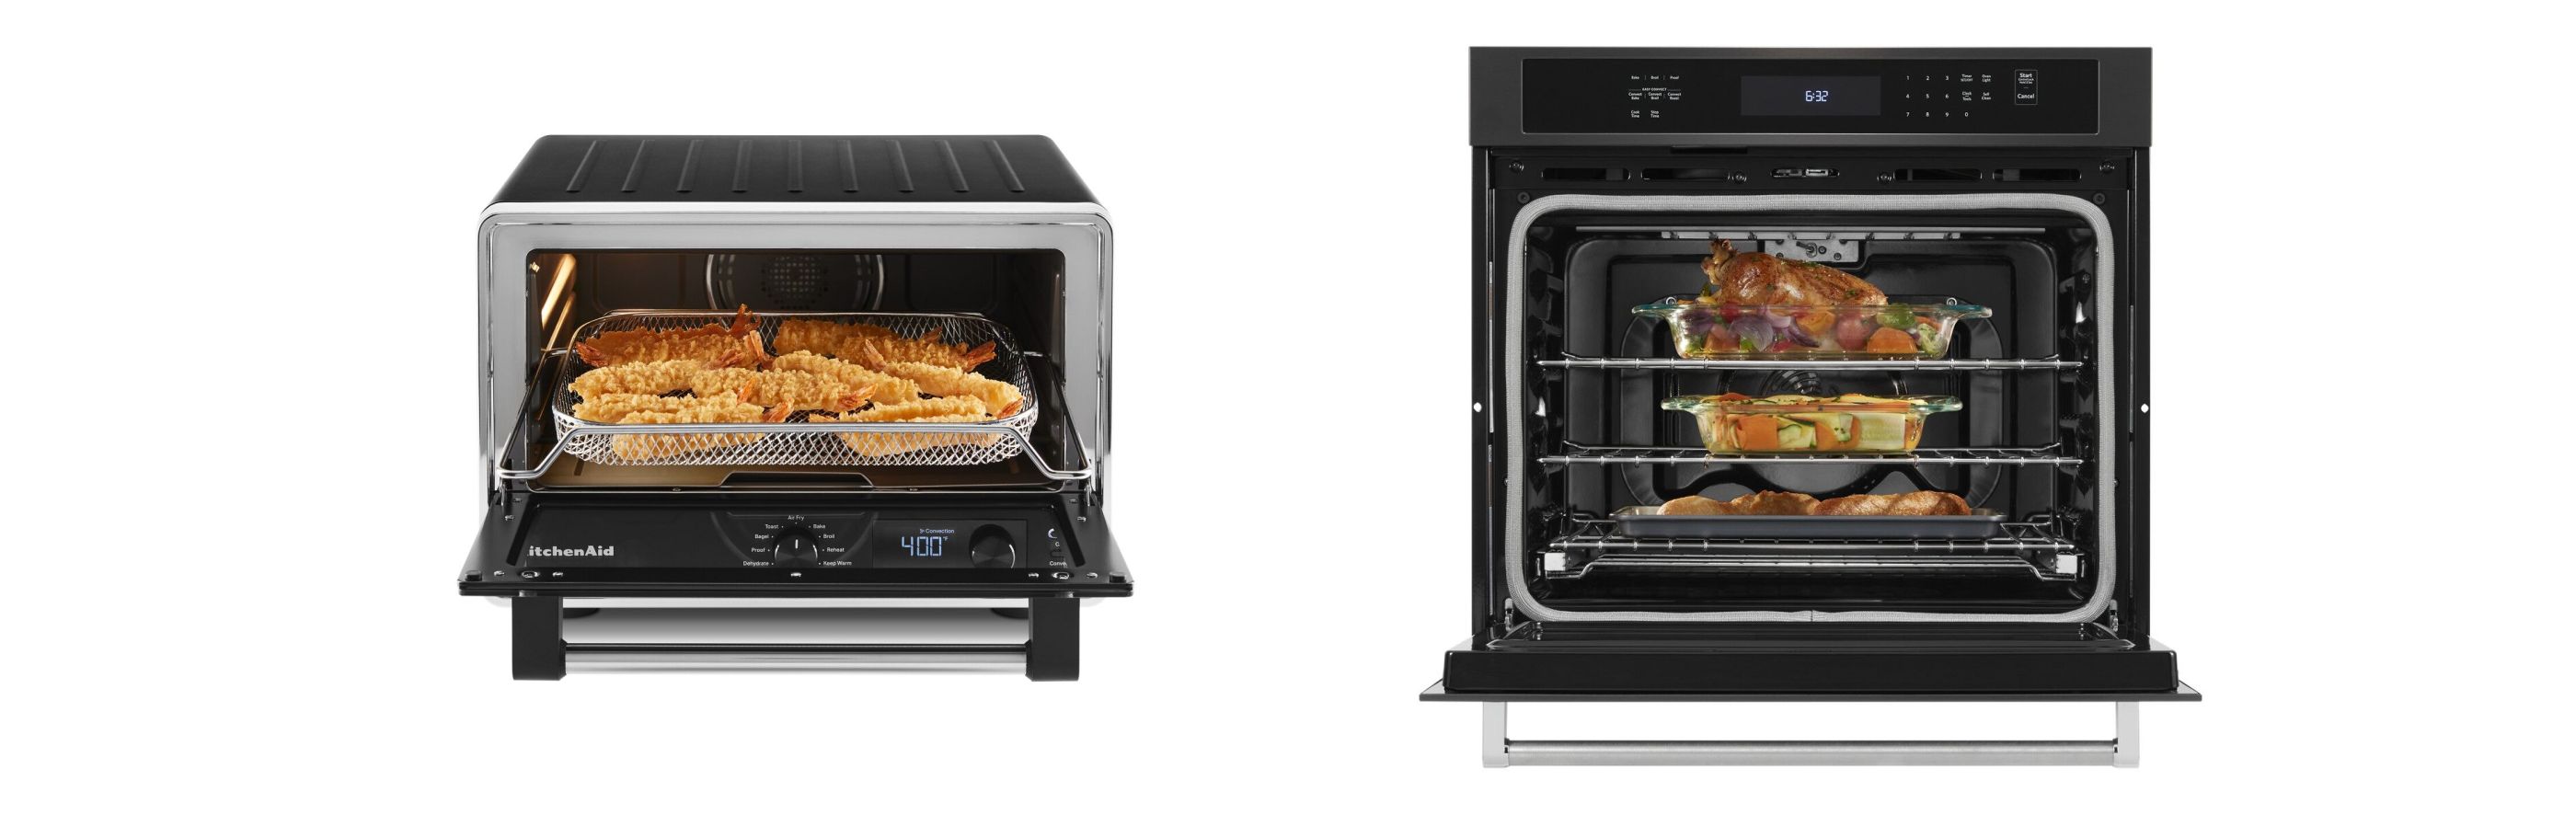 Air fryer next to an oven against a white background